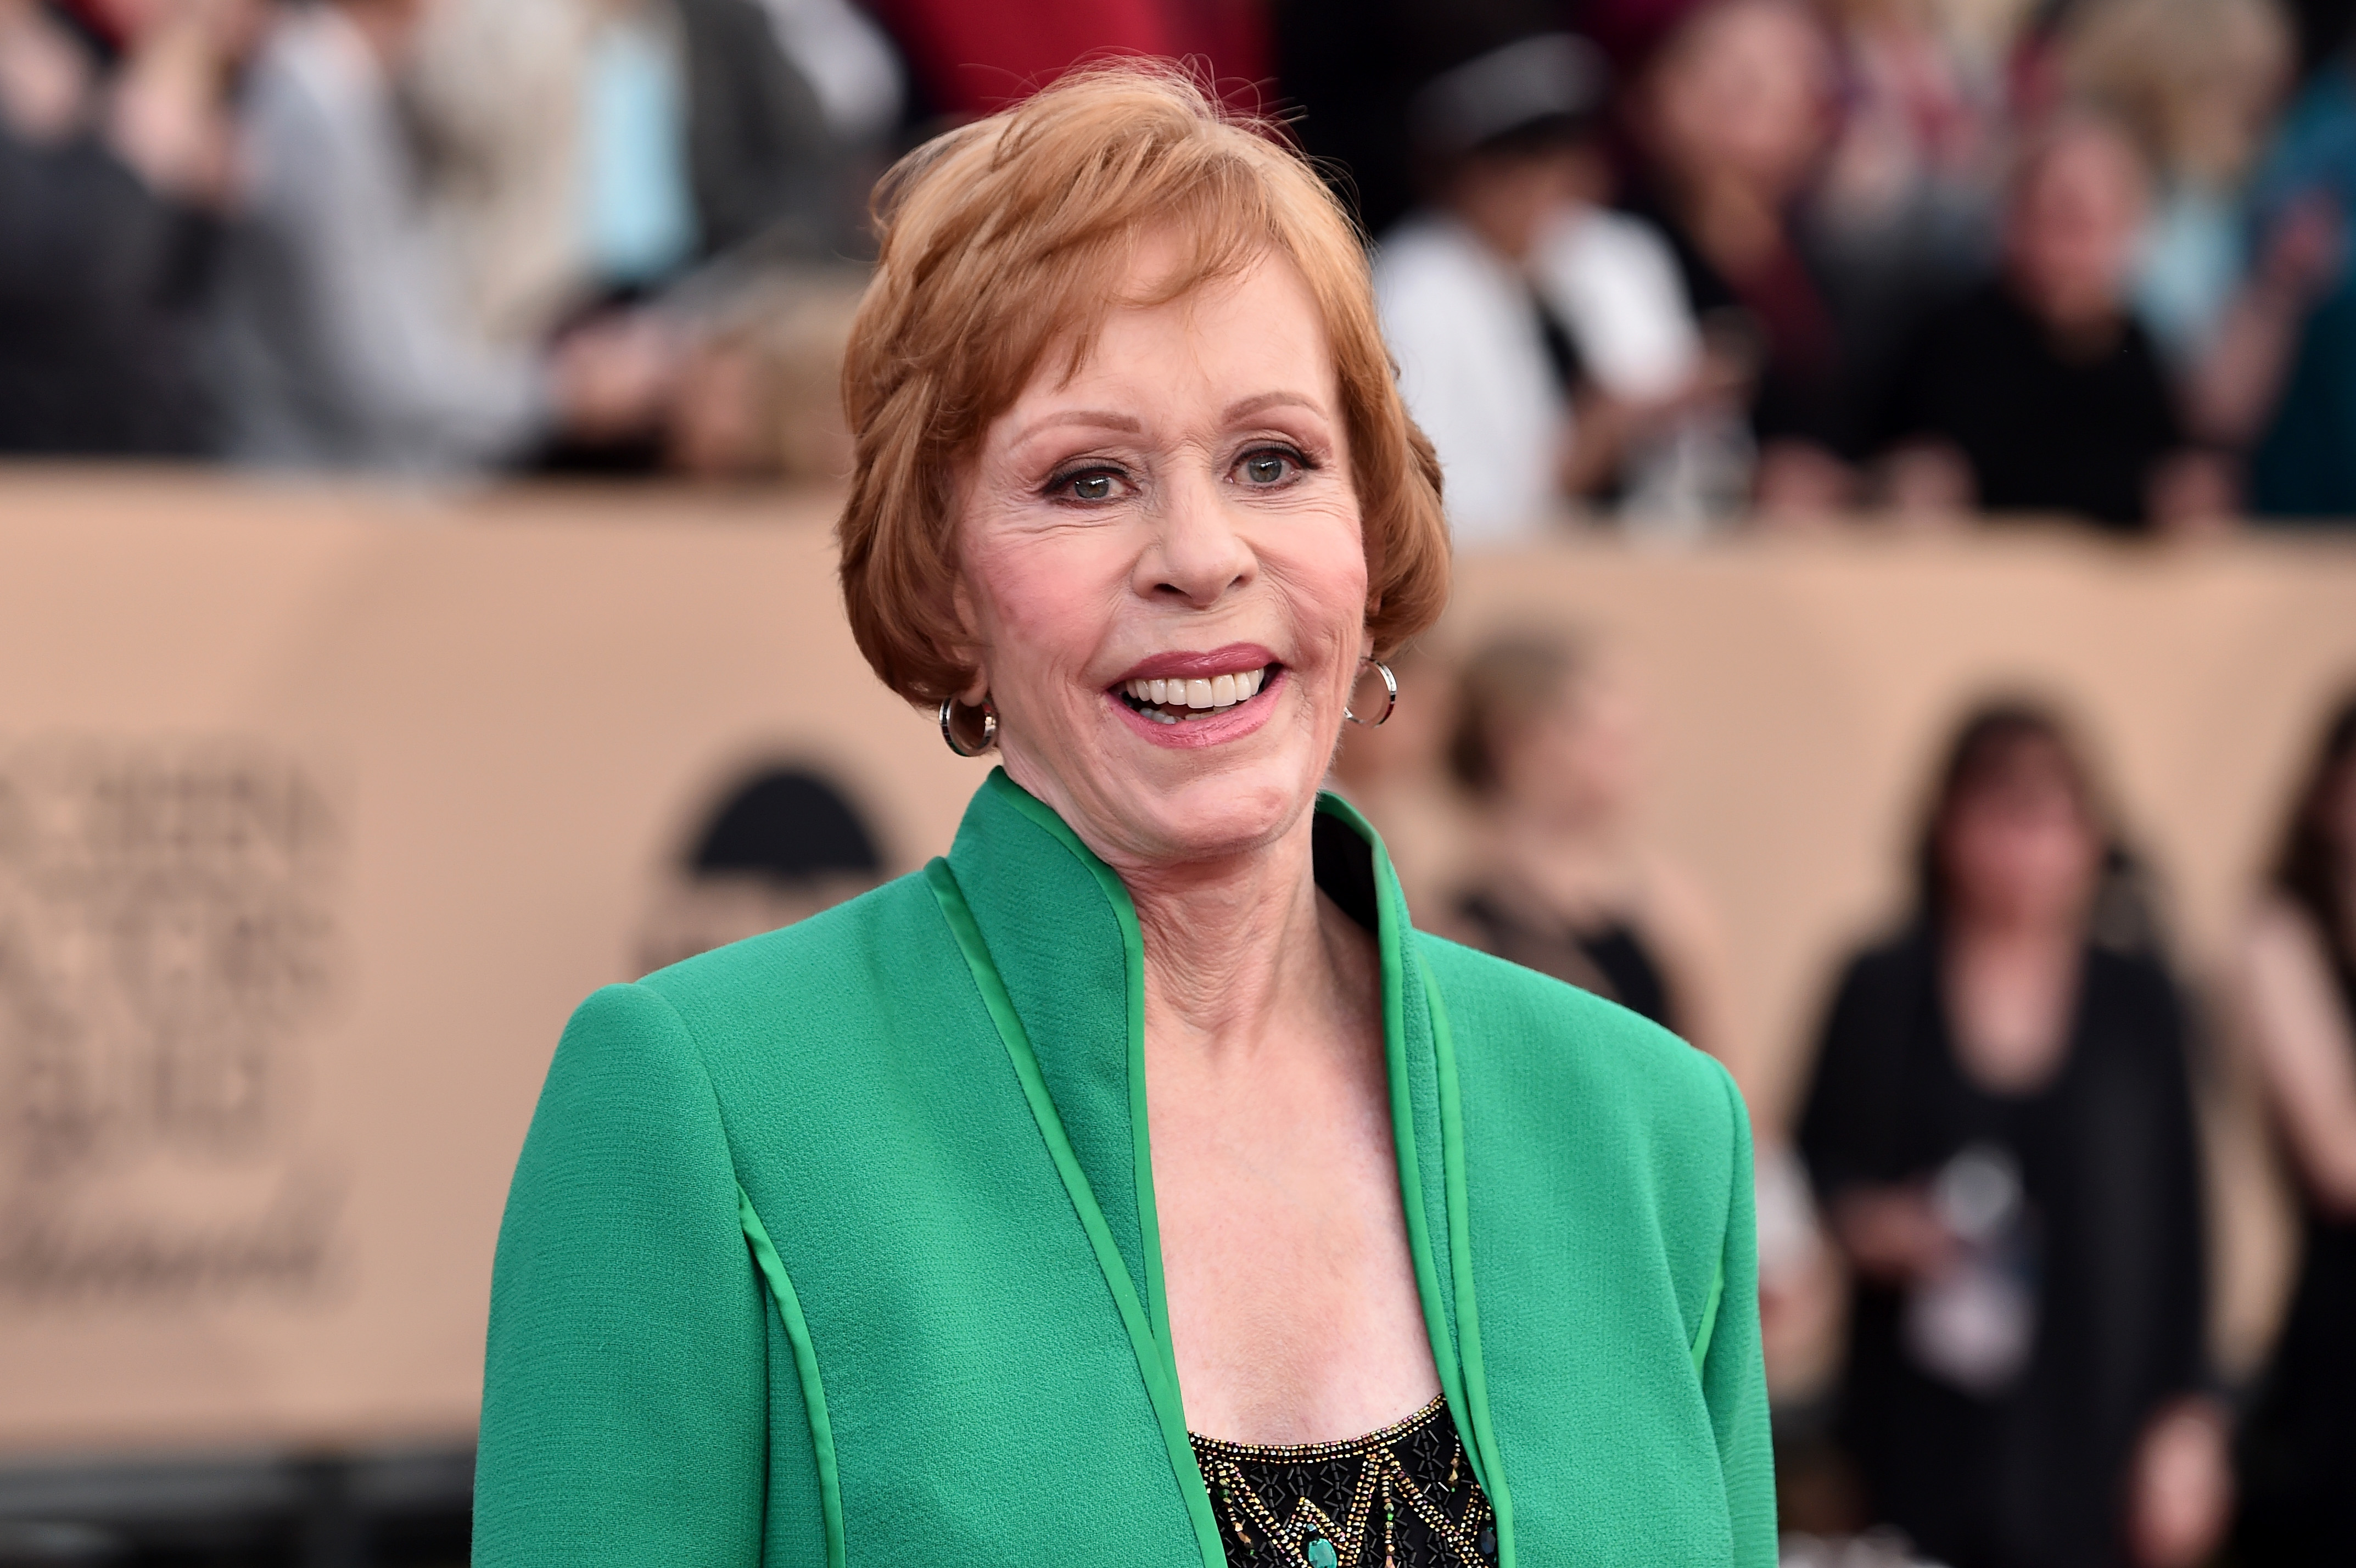 Carol Burnett at the 22nd Screen Actor's Guild Awards on January 30, 2016 in Los Angeles | Source: Getty Images